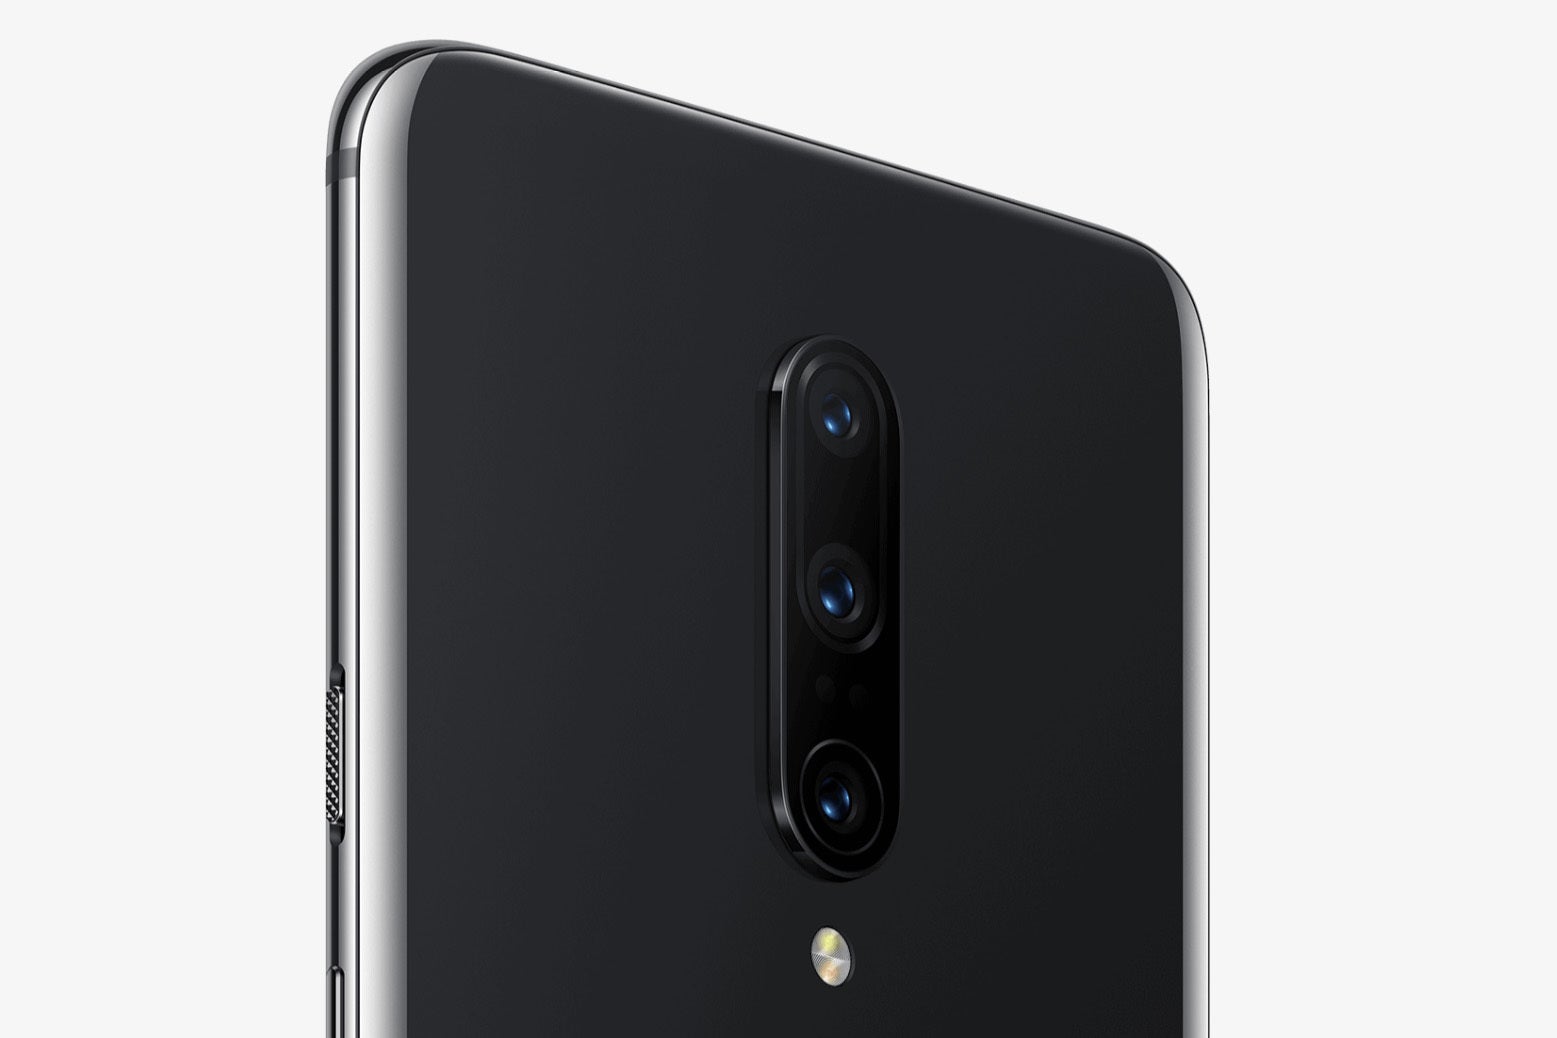 OnePlus 7 Pro: First camera samples are here